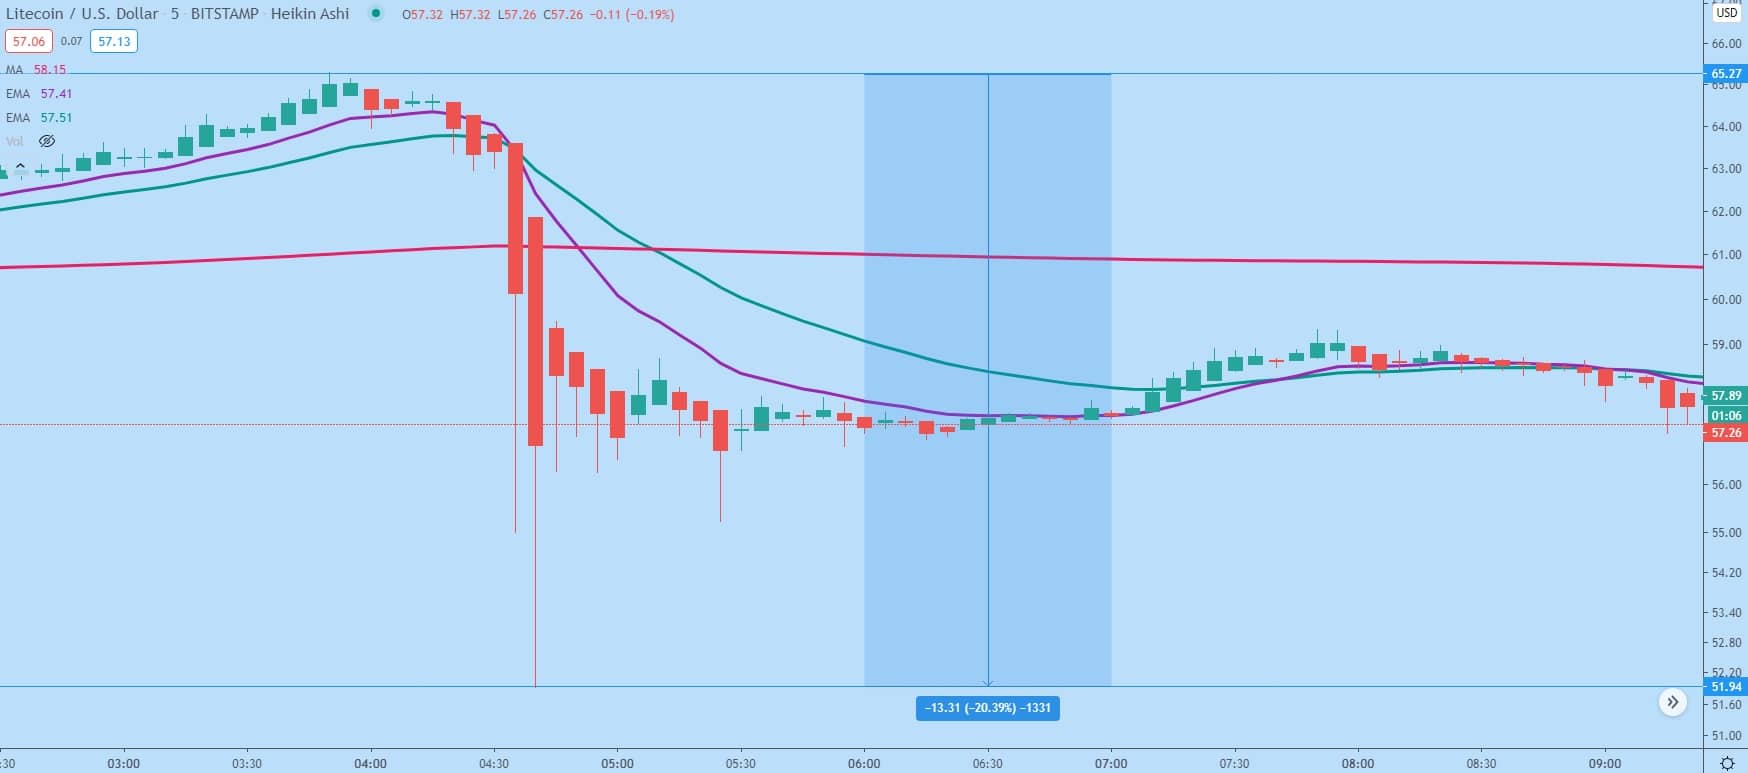 LTC/USD 5-min chart. Litecoin fell over 19% in 10 minutes